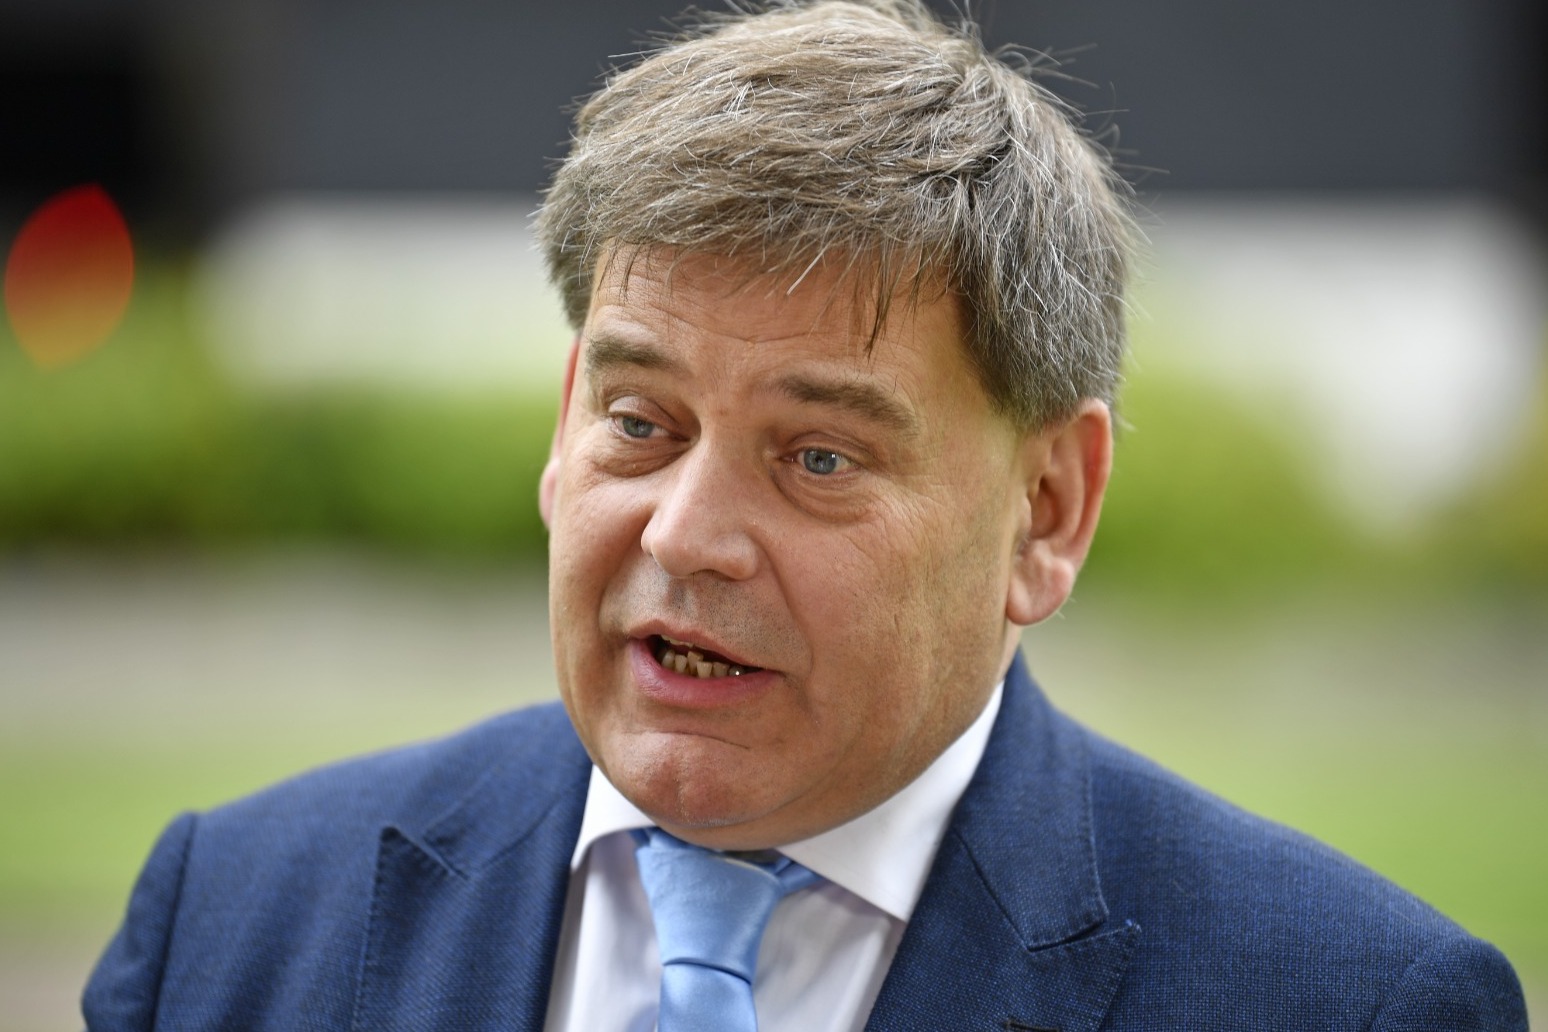 Andrew Bridgen stripped of Tory whip over Covid vaccine comments 